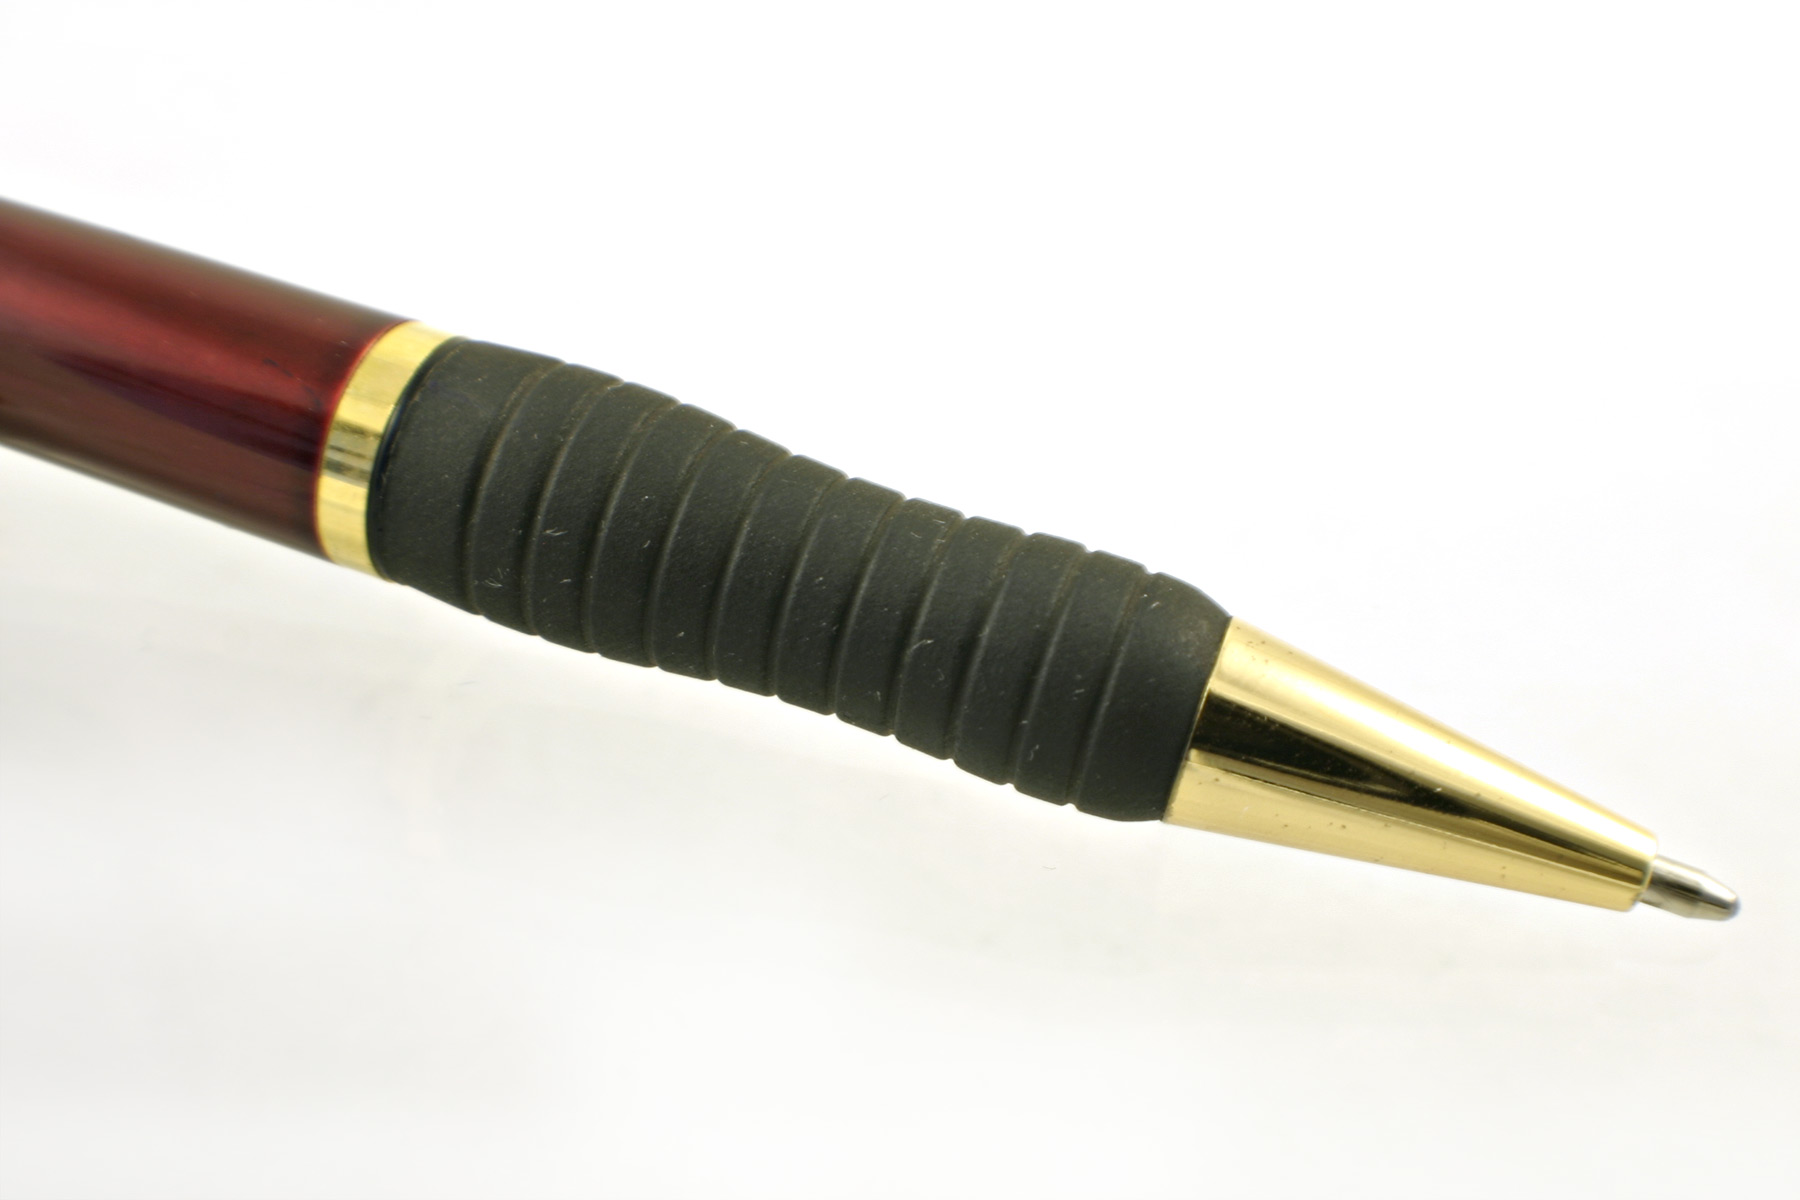 Red and golden pen closeup photo